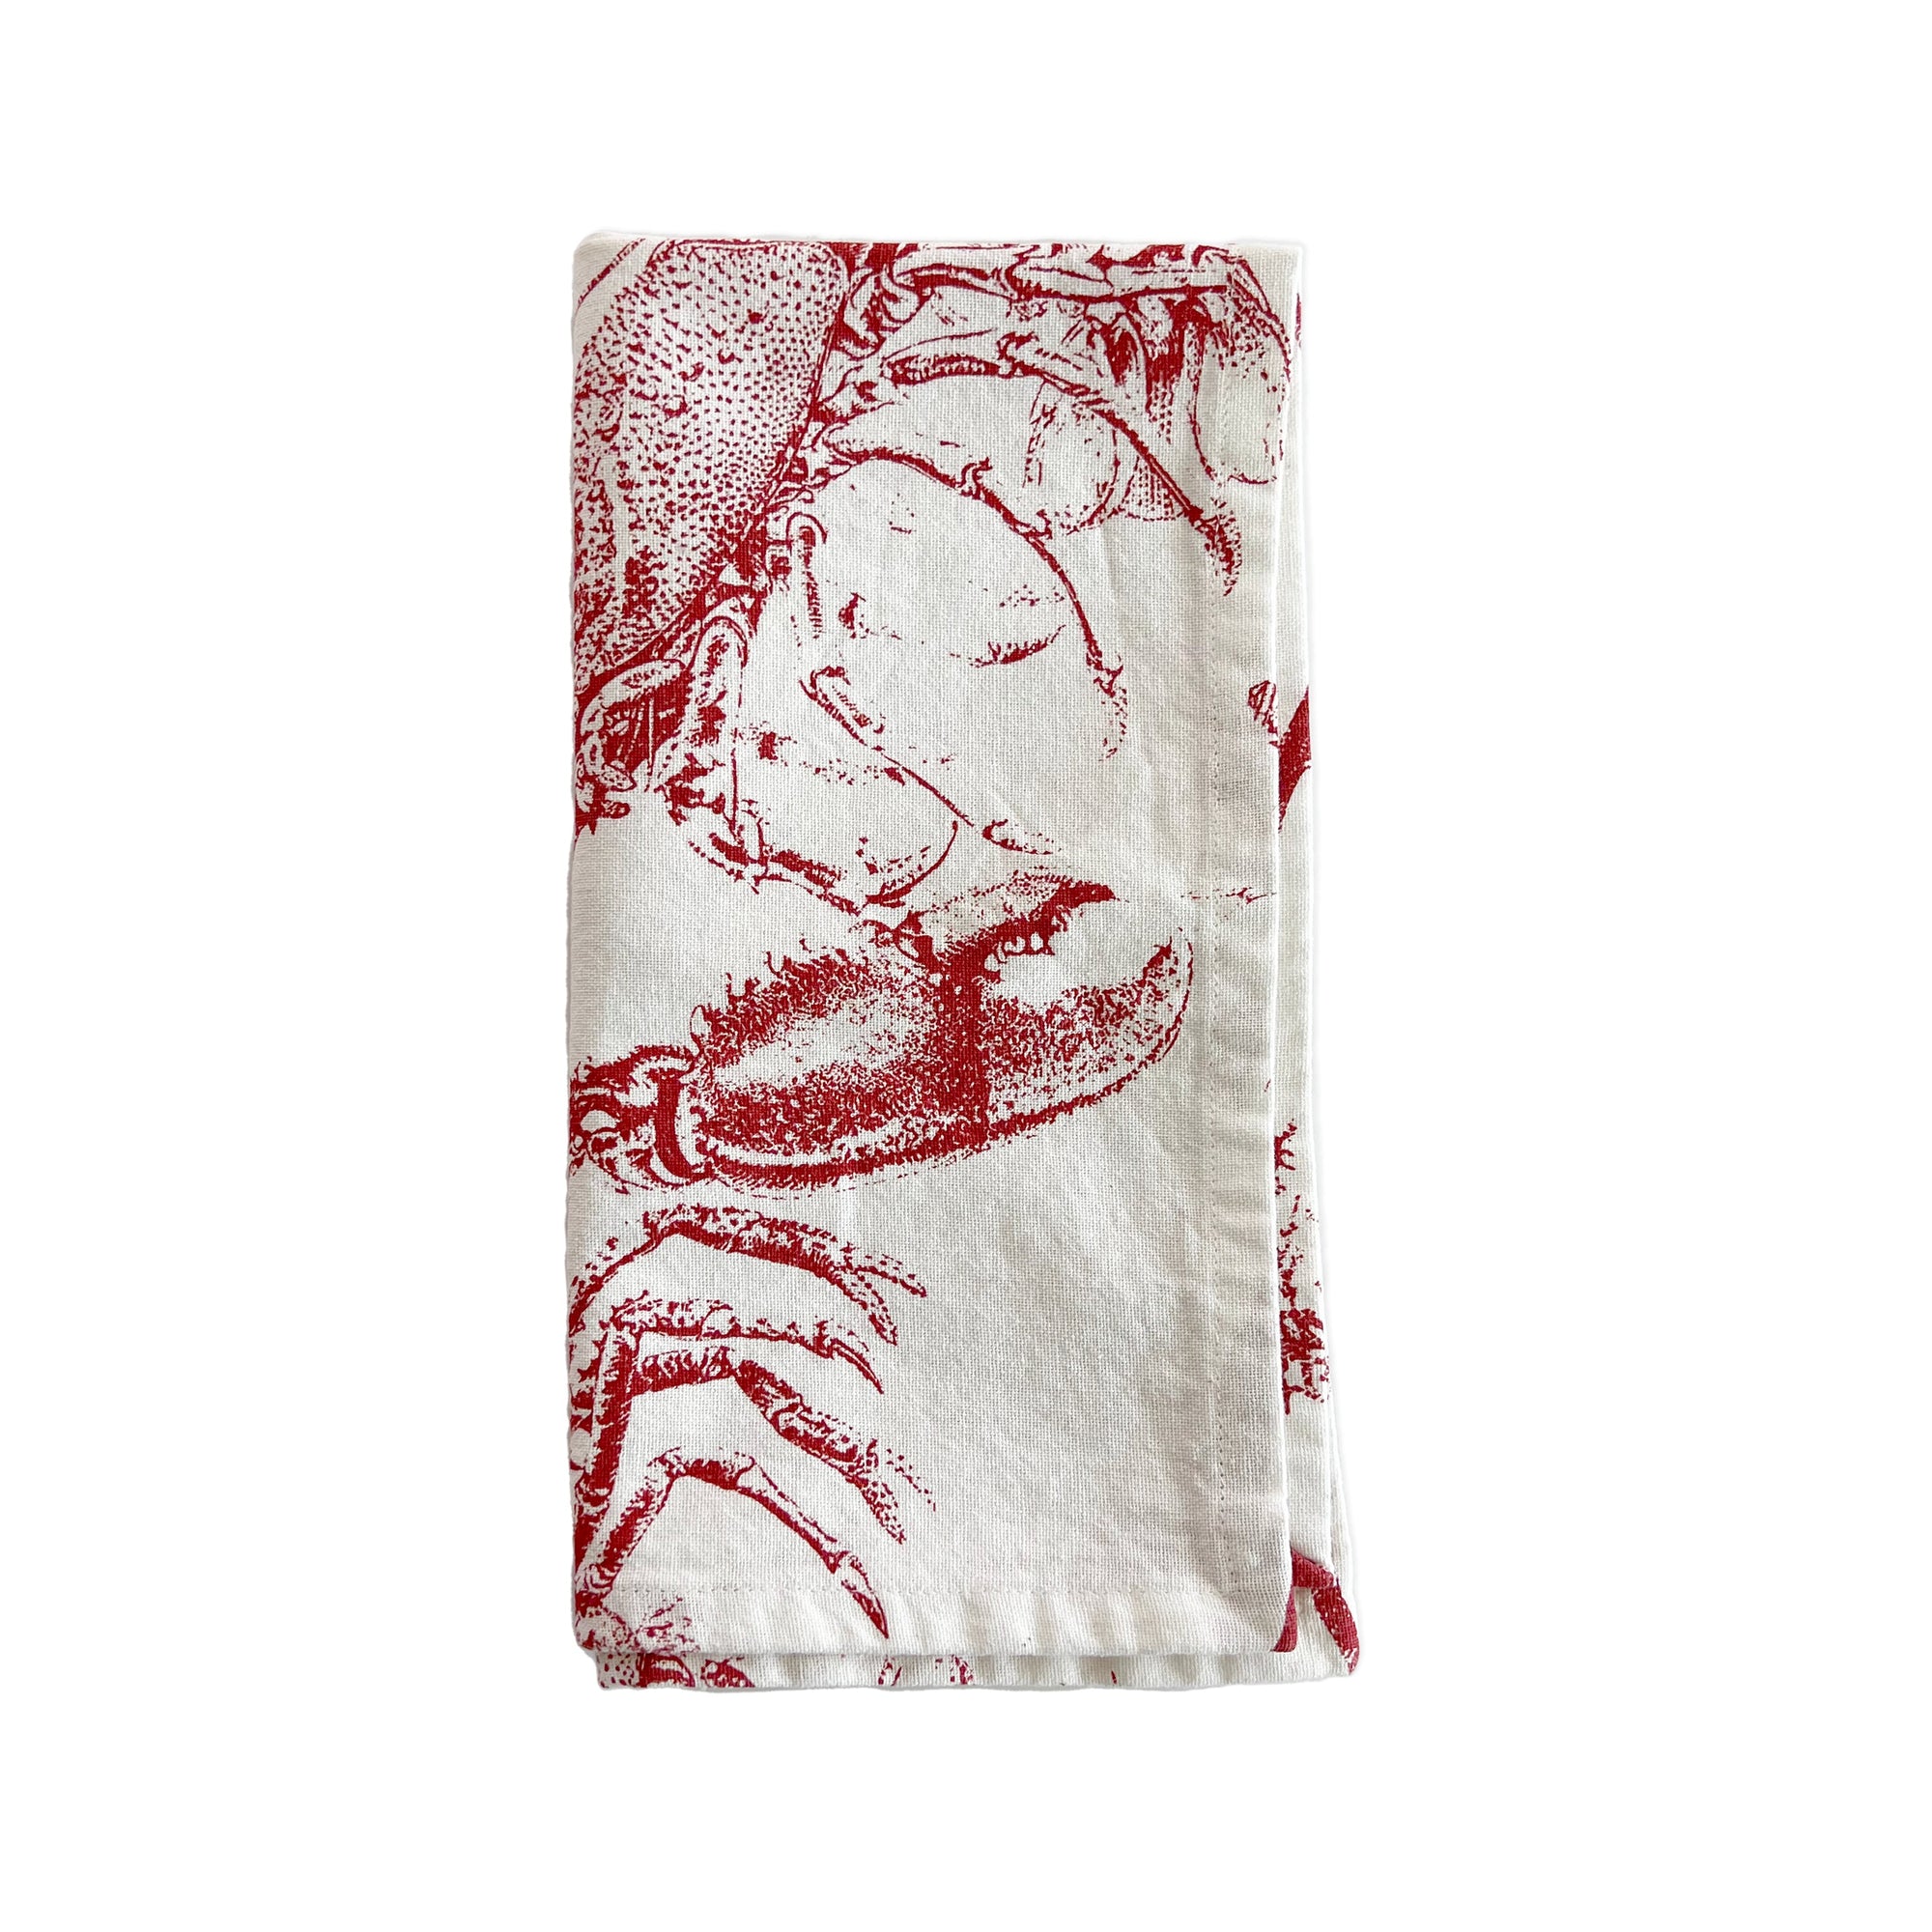 Red Lobsters 100% cotton napkins sold as a set of 4 from Caskata